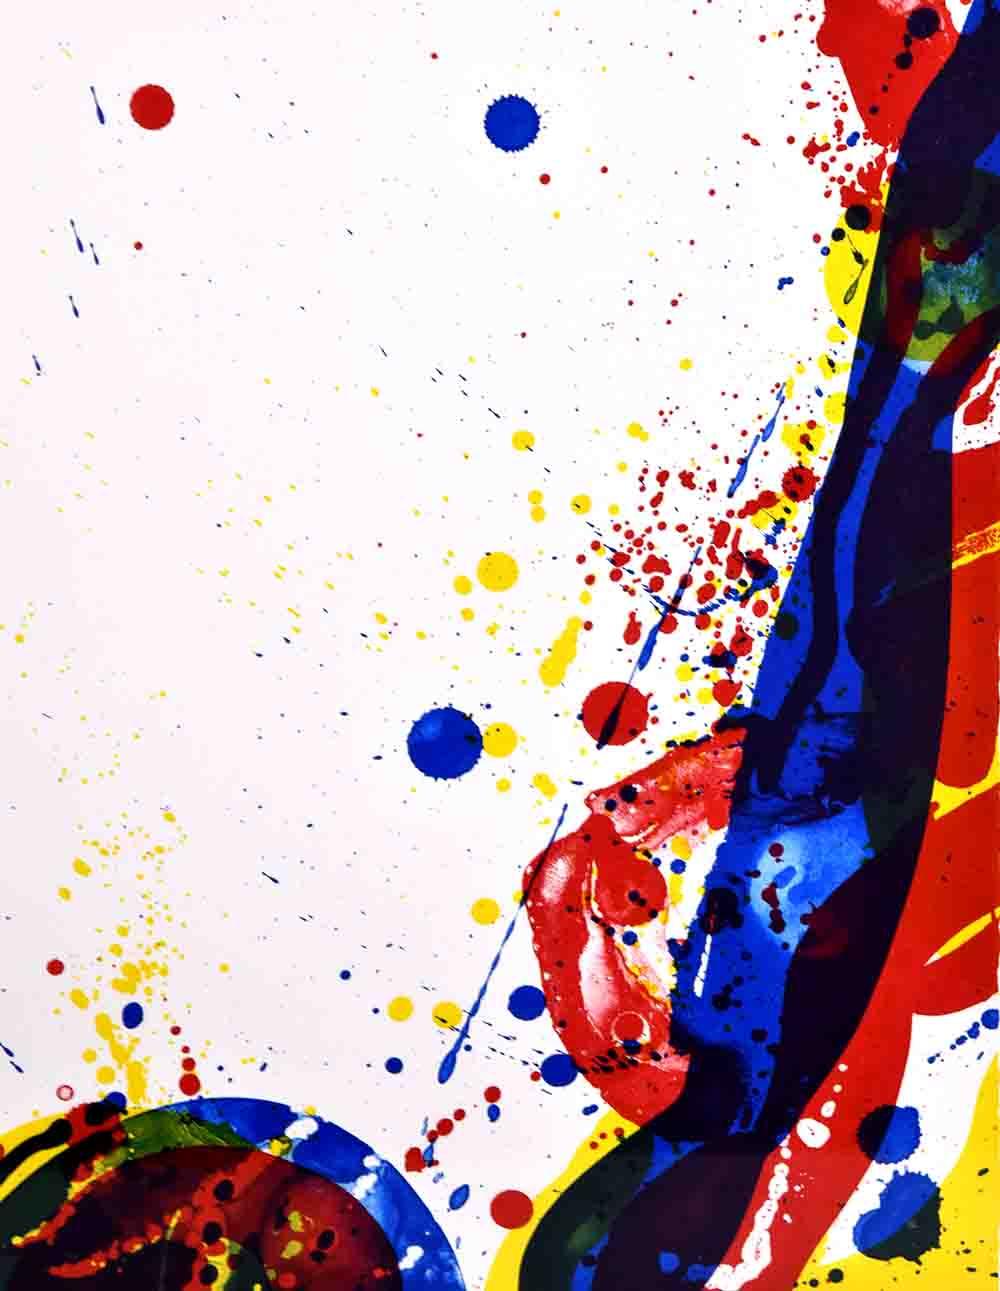 Sam Francis A Sail, 1969 is an exciting expression of color and movement formatted in a landscape orientation. Emblematic of two of the artist’s most recognized approaches, A Sail, 1969 showcases his more painterly, quick and loose application. 